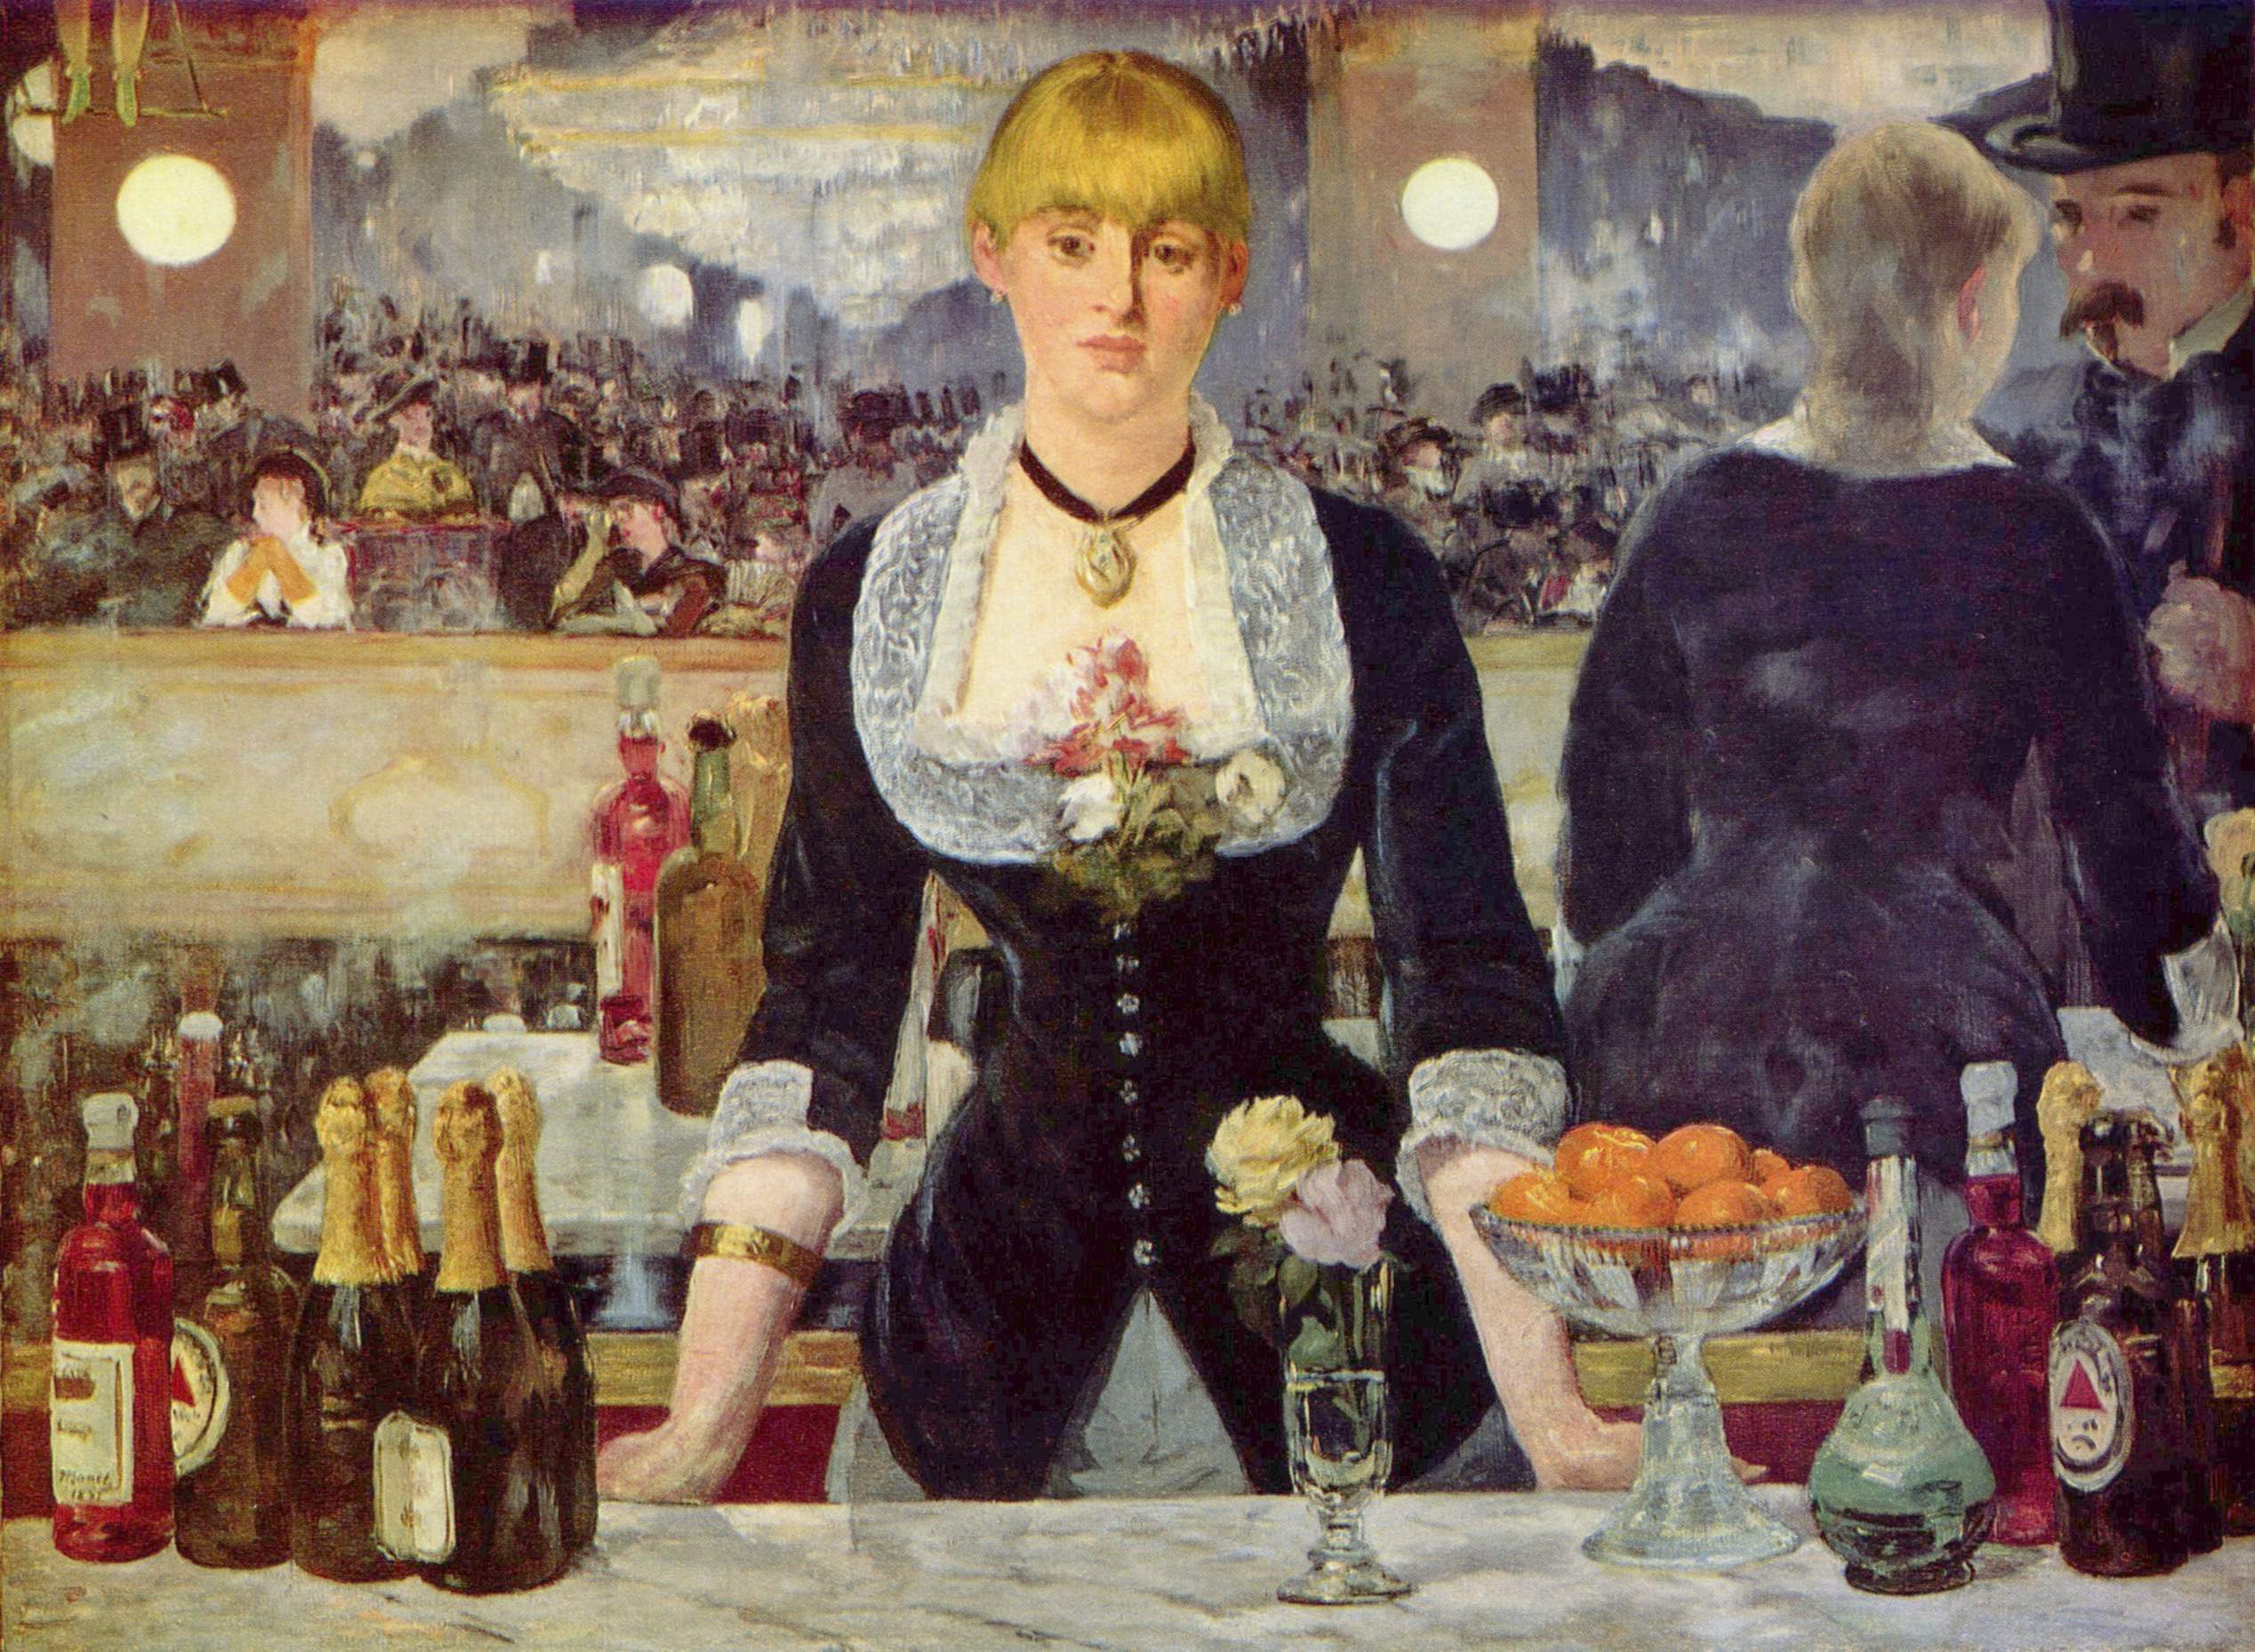 A Bar at the Folies-Bergère by Édouard Manet - 1882 - 96 × 130 cm The Courtauld Gallery